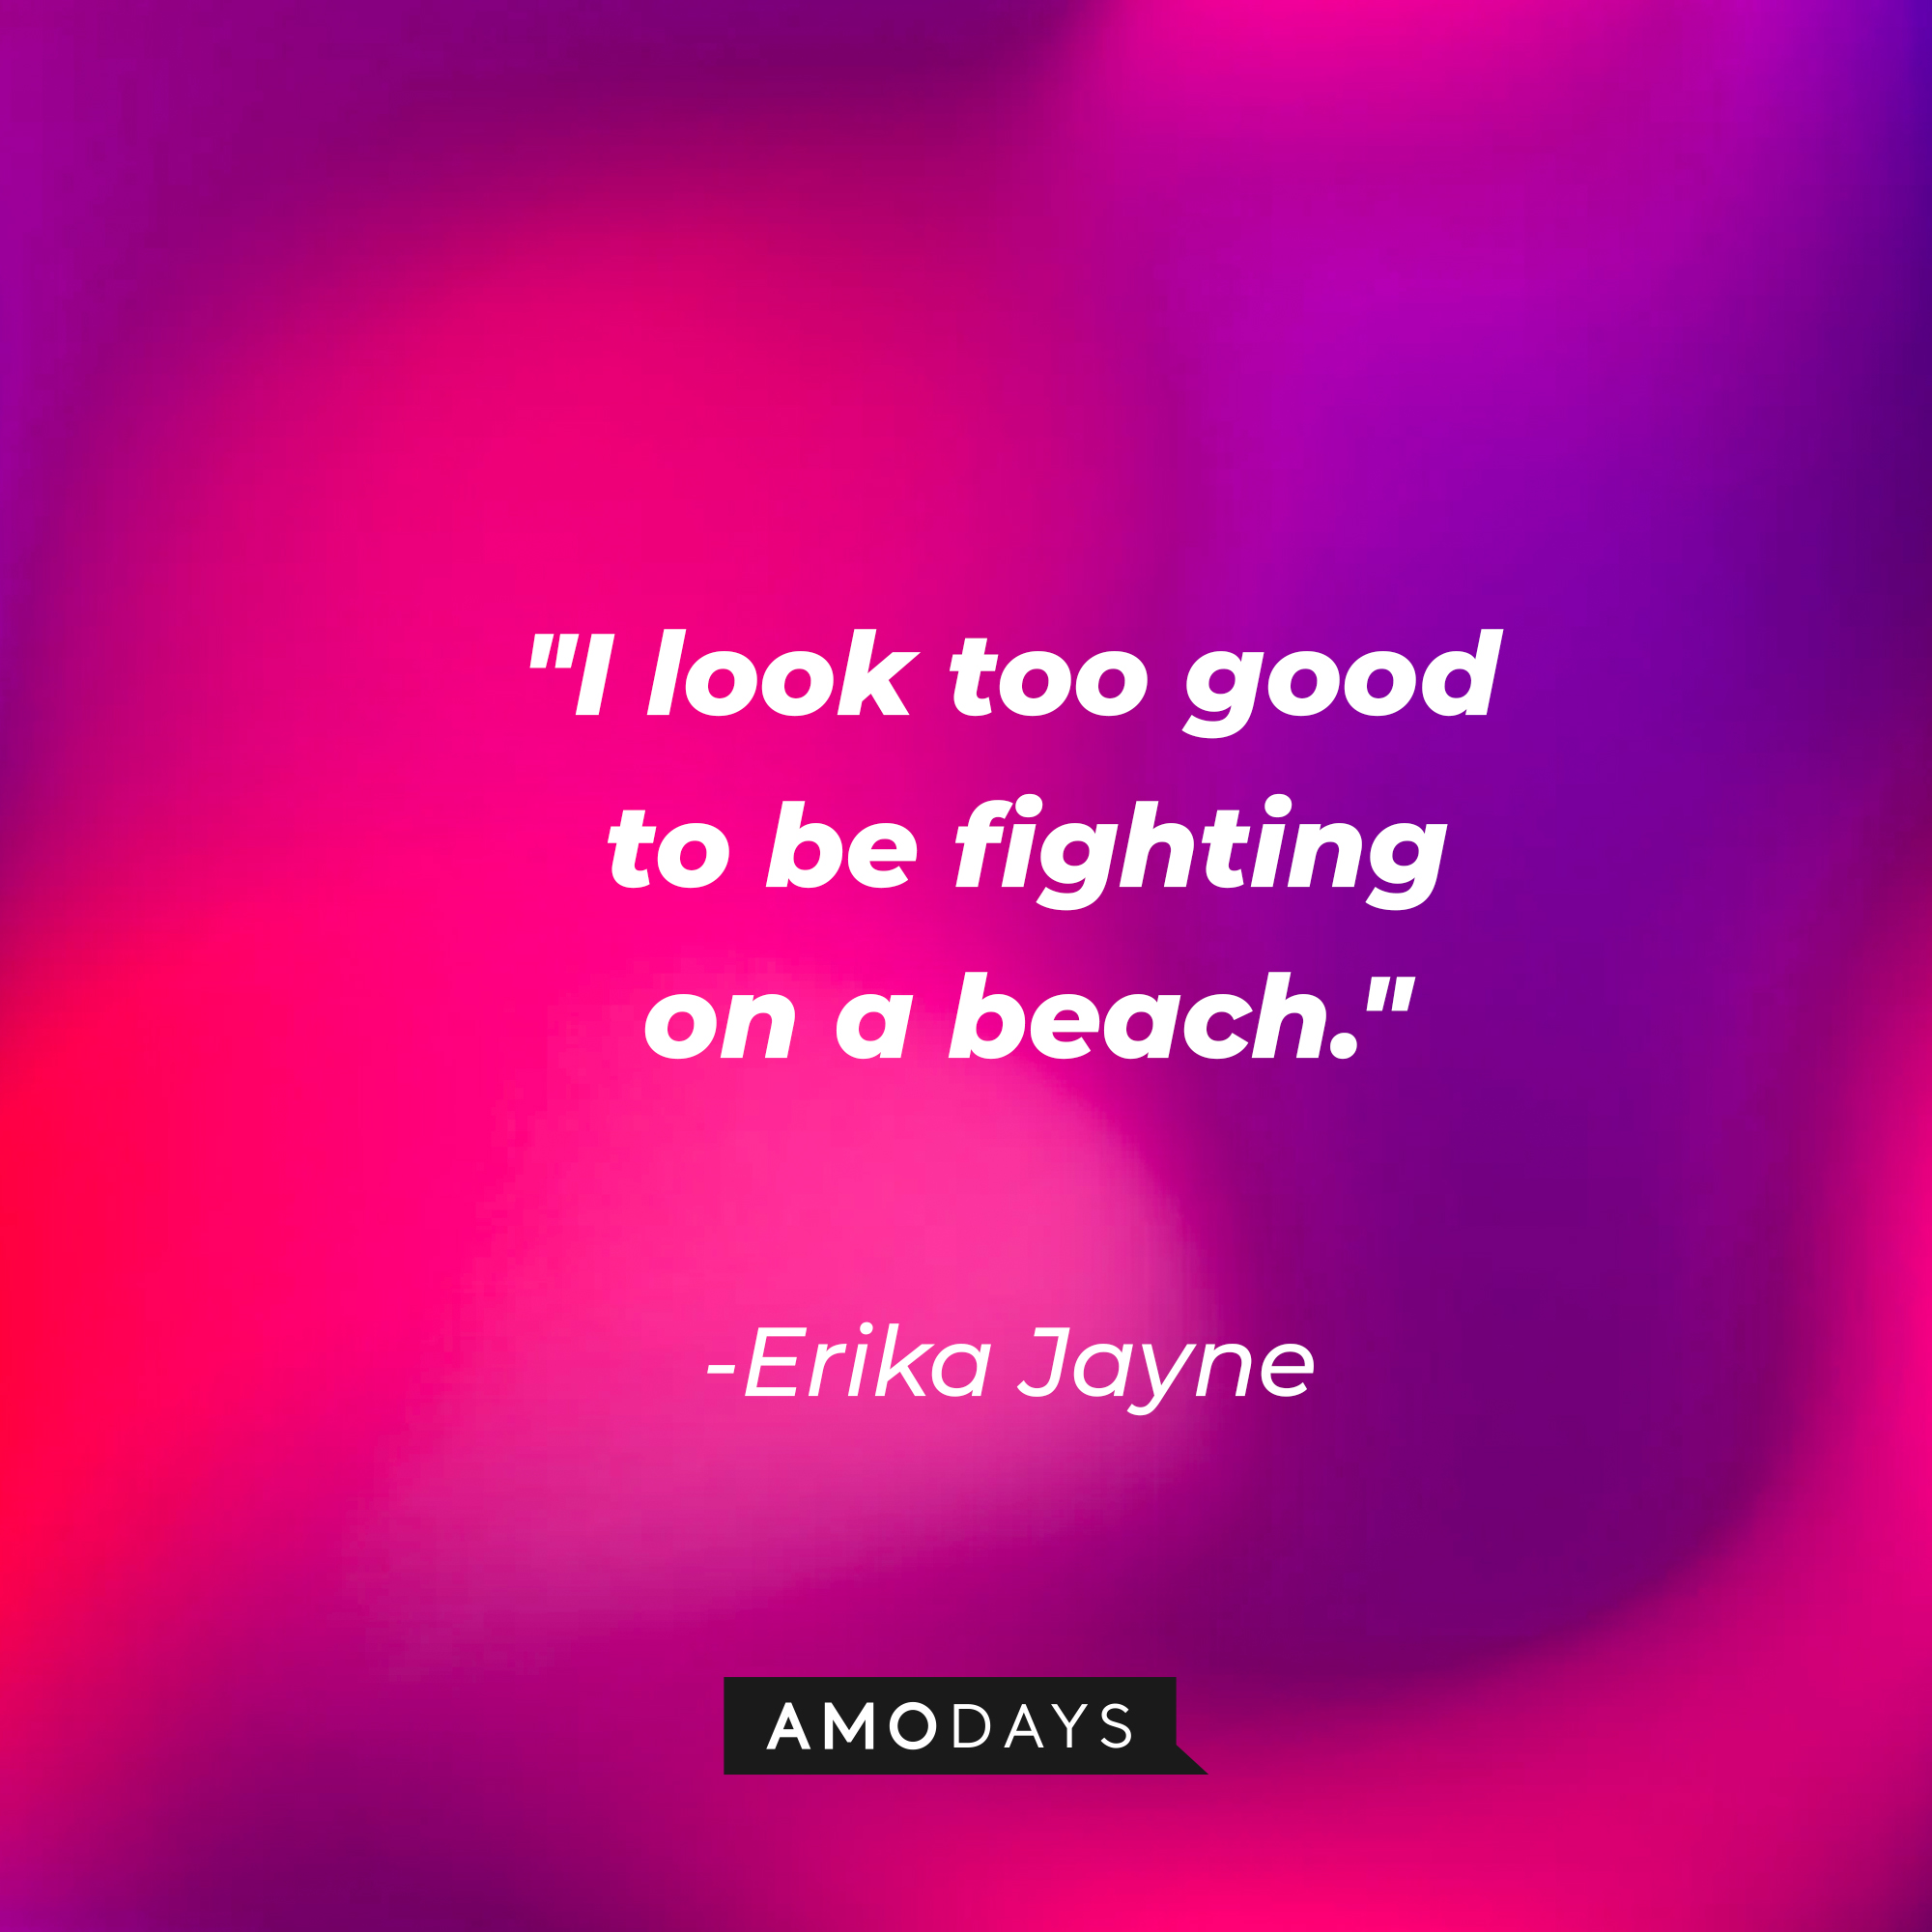 Erika Jayne’s quote: "I look too good to be fighting on a beach." | Image: Amodays